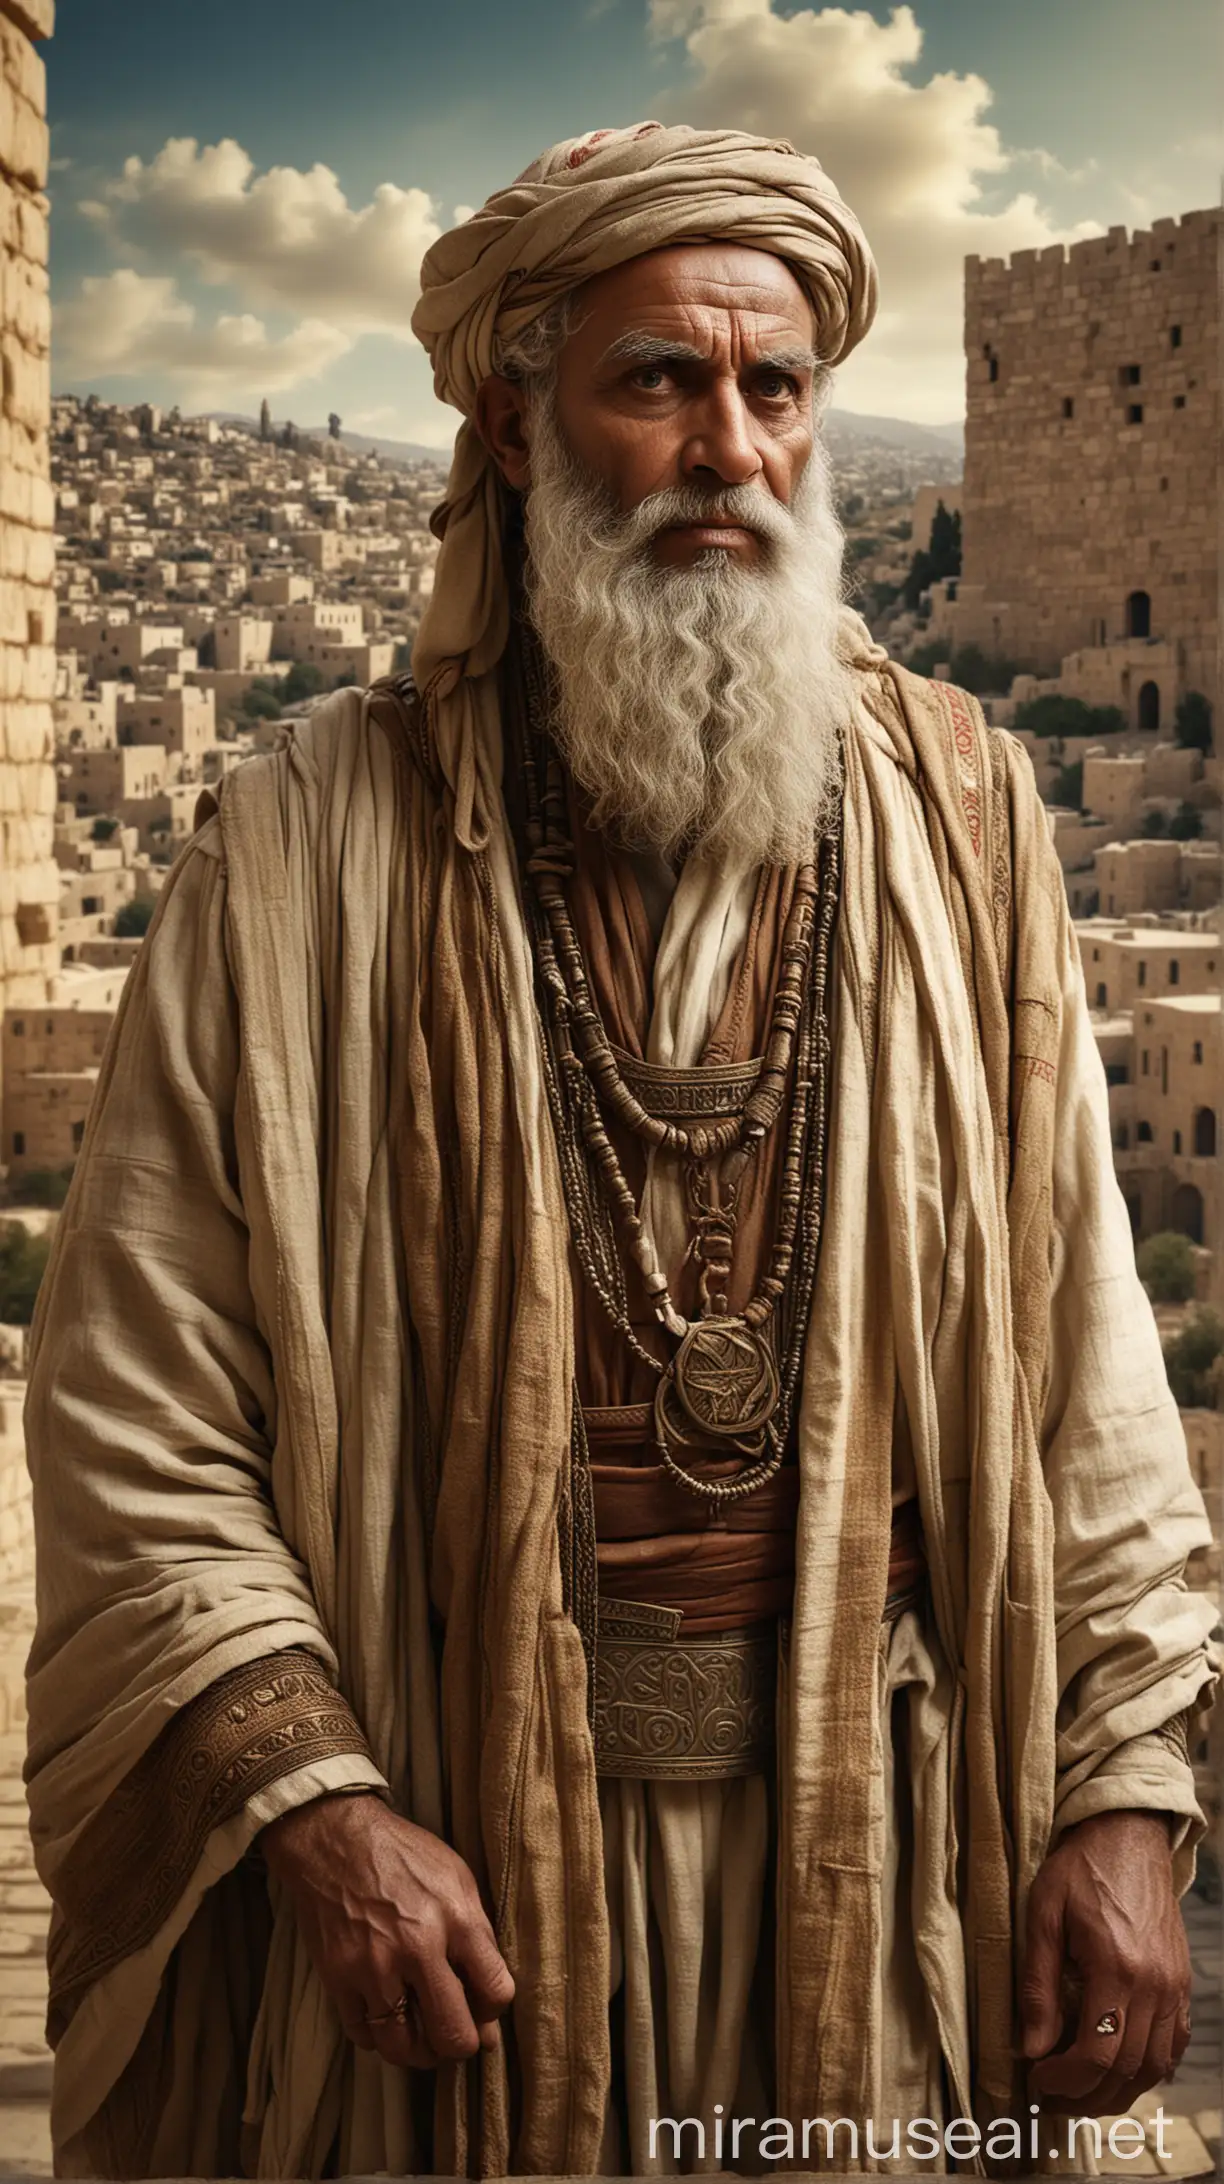 Create an image of an ancient Hebrew leader named Uttai, with a solemn expression, dressed in traditional 6th century BC attire, symbolizing his role as a succorer. The background should depict ancient Jerusalem, with its historical buildings and walls."In ancient world 